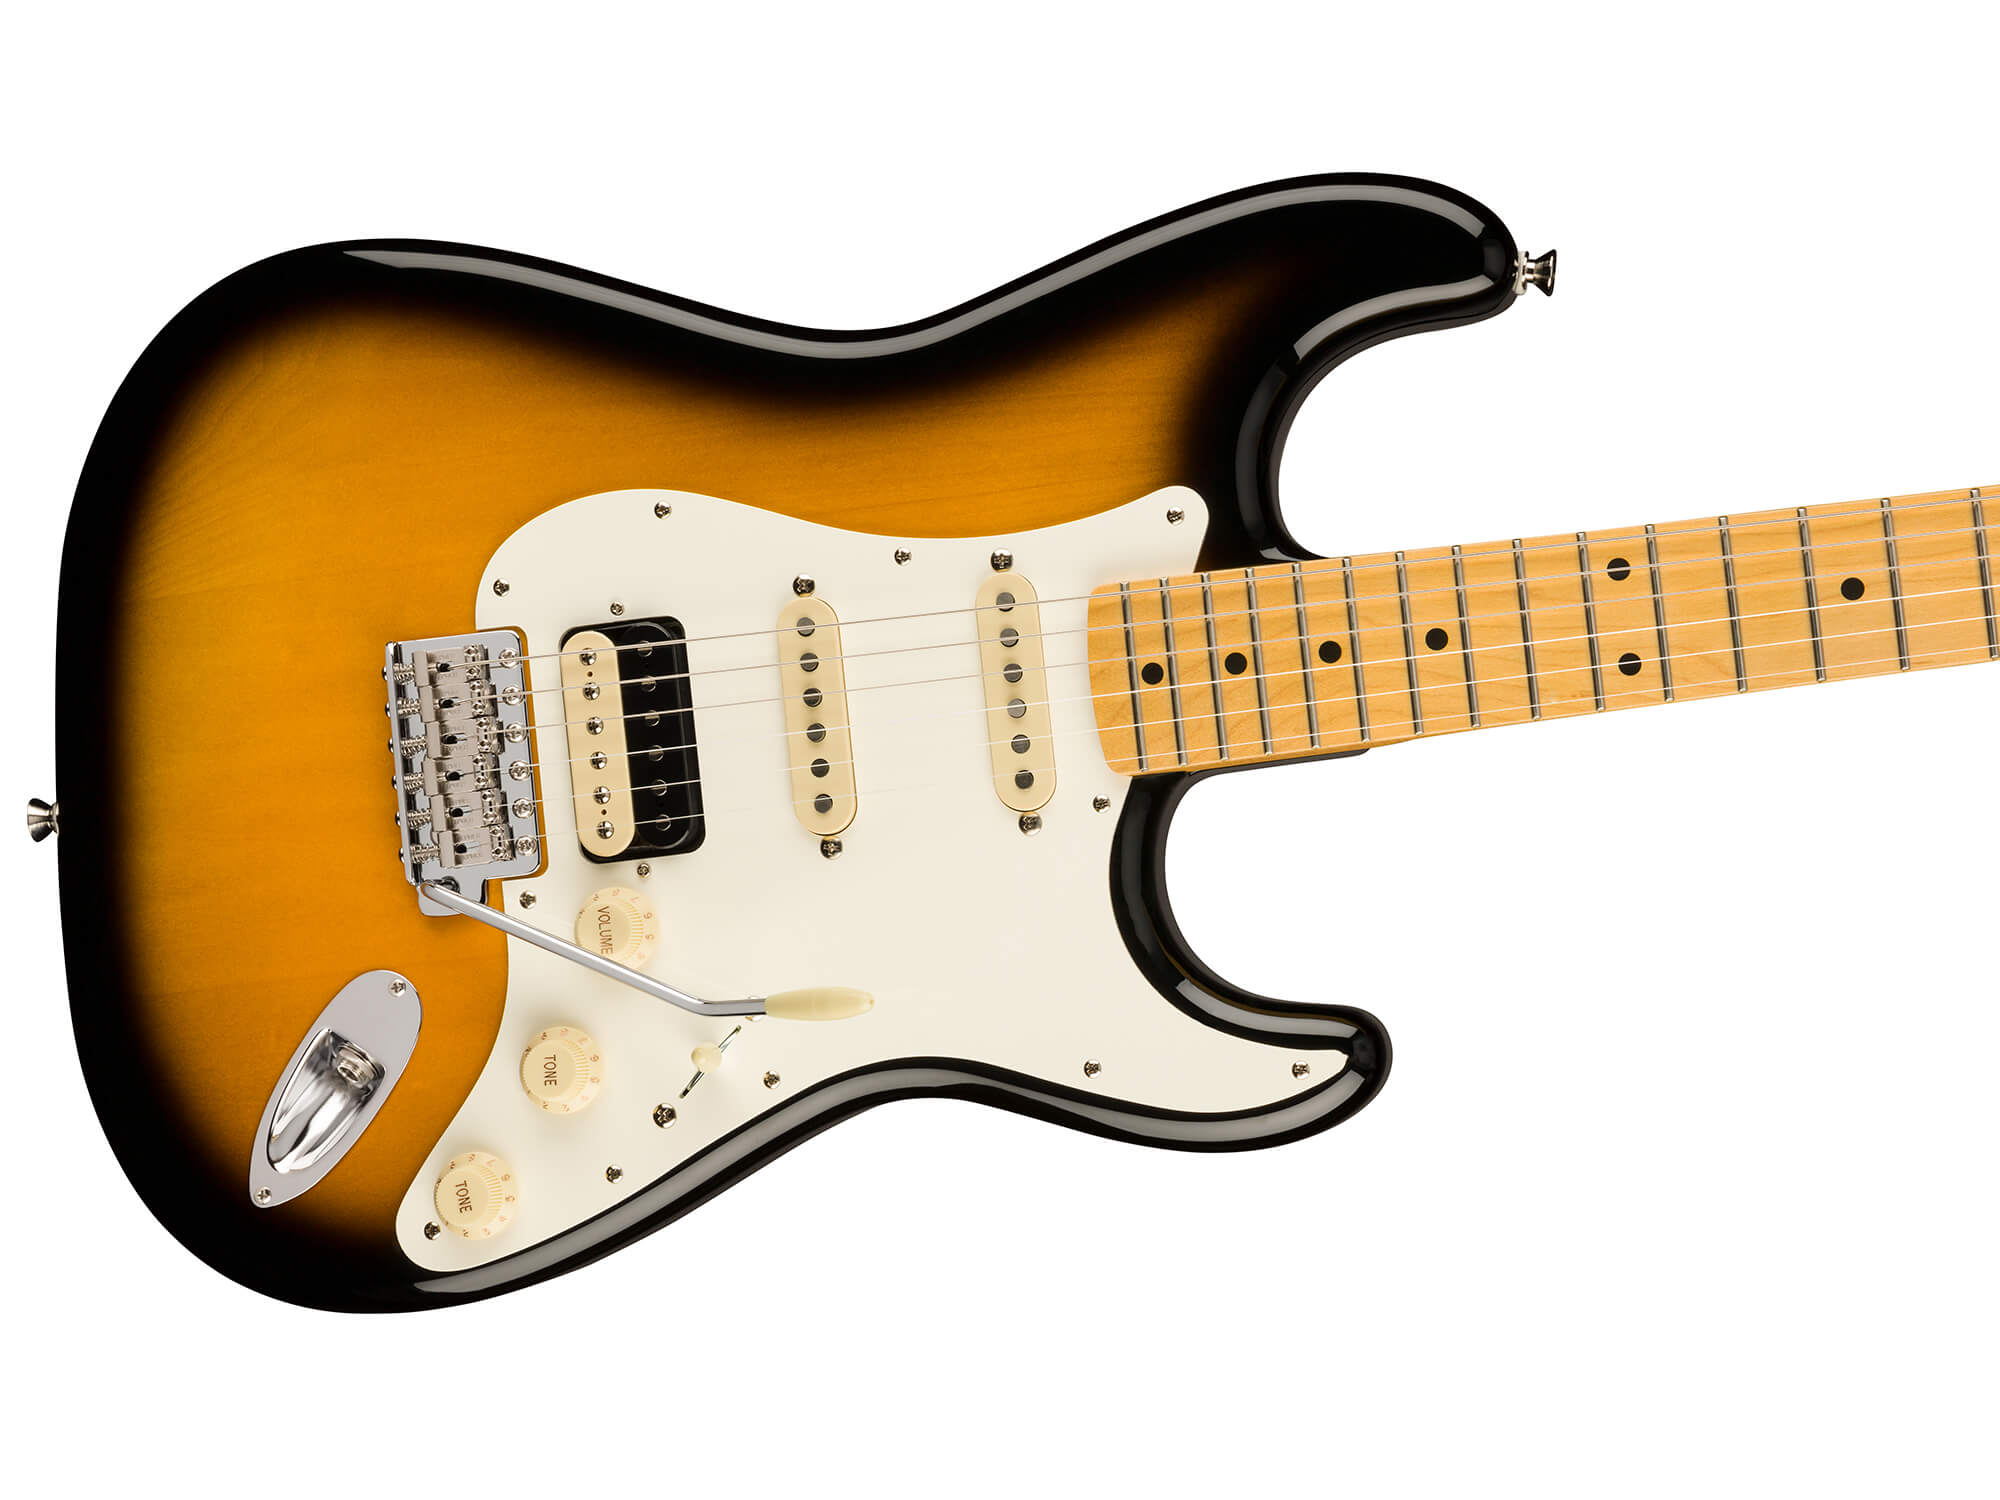 Fender's JV Modified Series takes cues from the Japanese Vintage 